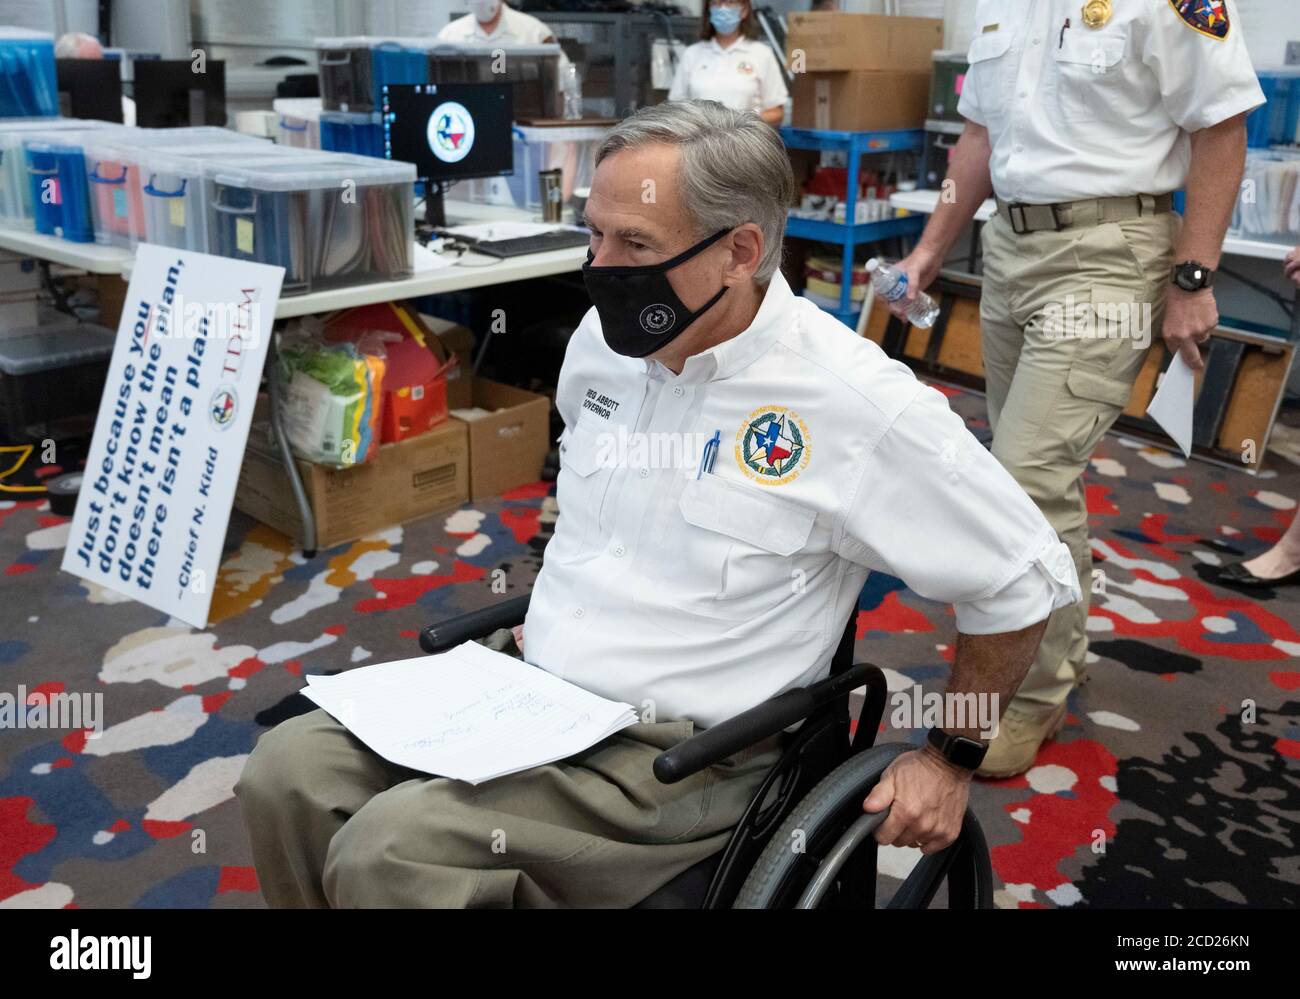 Austin, TX USA August 25, 2020: Texas Gov. Greg Abbott, wearing a face mask, enters the state Emergency Operations Center to hear a report on the state's preparations for Hurricane Laura, scheduled to make landfall in coastal east Texas and southwest Louisiana on Thursday. Abbott mobilized hundreds of state resources as Texans remember the extreme damage done by Hurricane Harvey in 2017. Abbott has been confined to a wheelchair since a falling tree limb fell on him in 1984. Credit: Bob Daemmrich/Alamy Live News Stock Photo